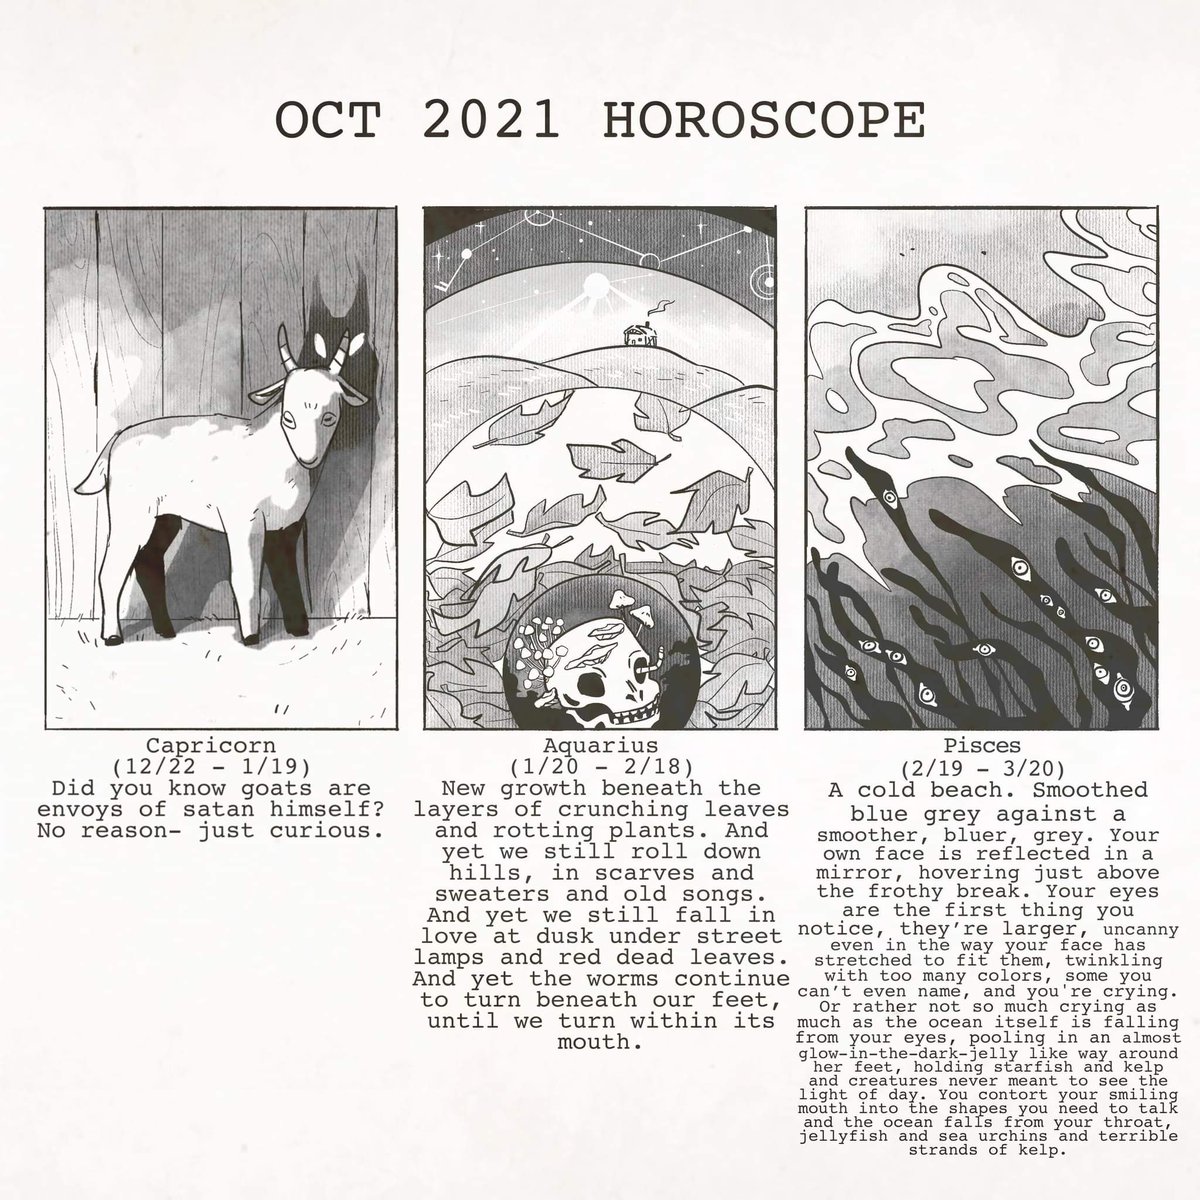 october horoscopes I did for the sublevel

(calrats secret monthly student newspaper) 